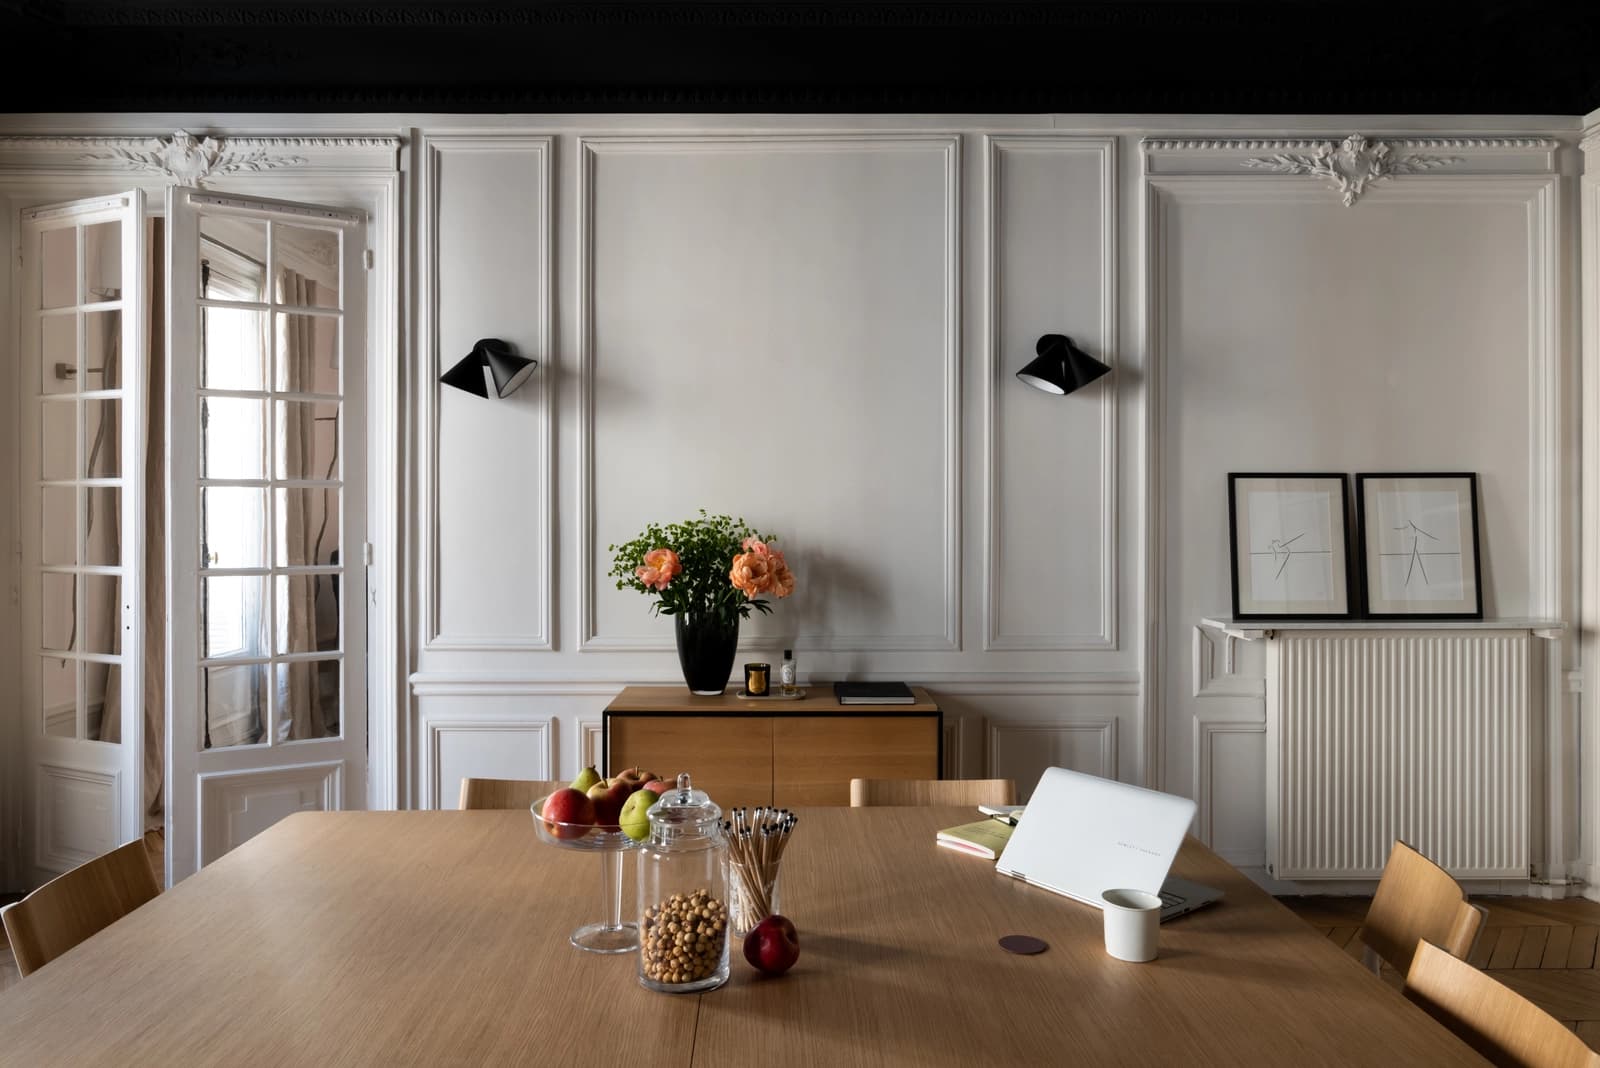 Space Parisian apartment with character - 2